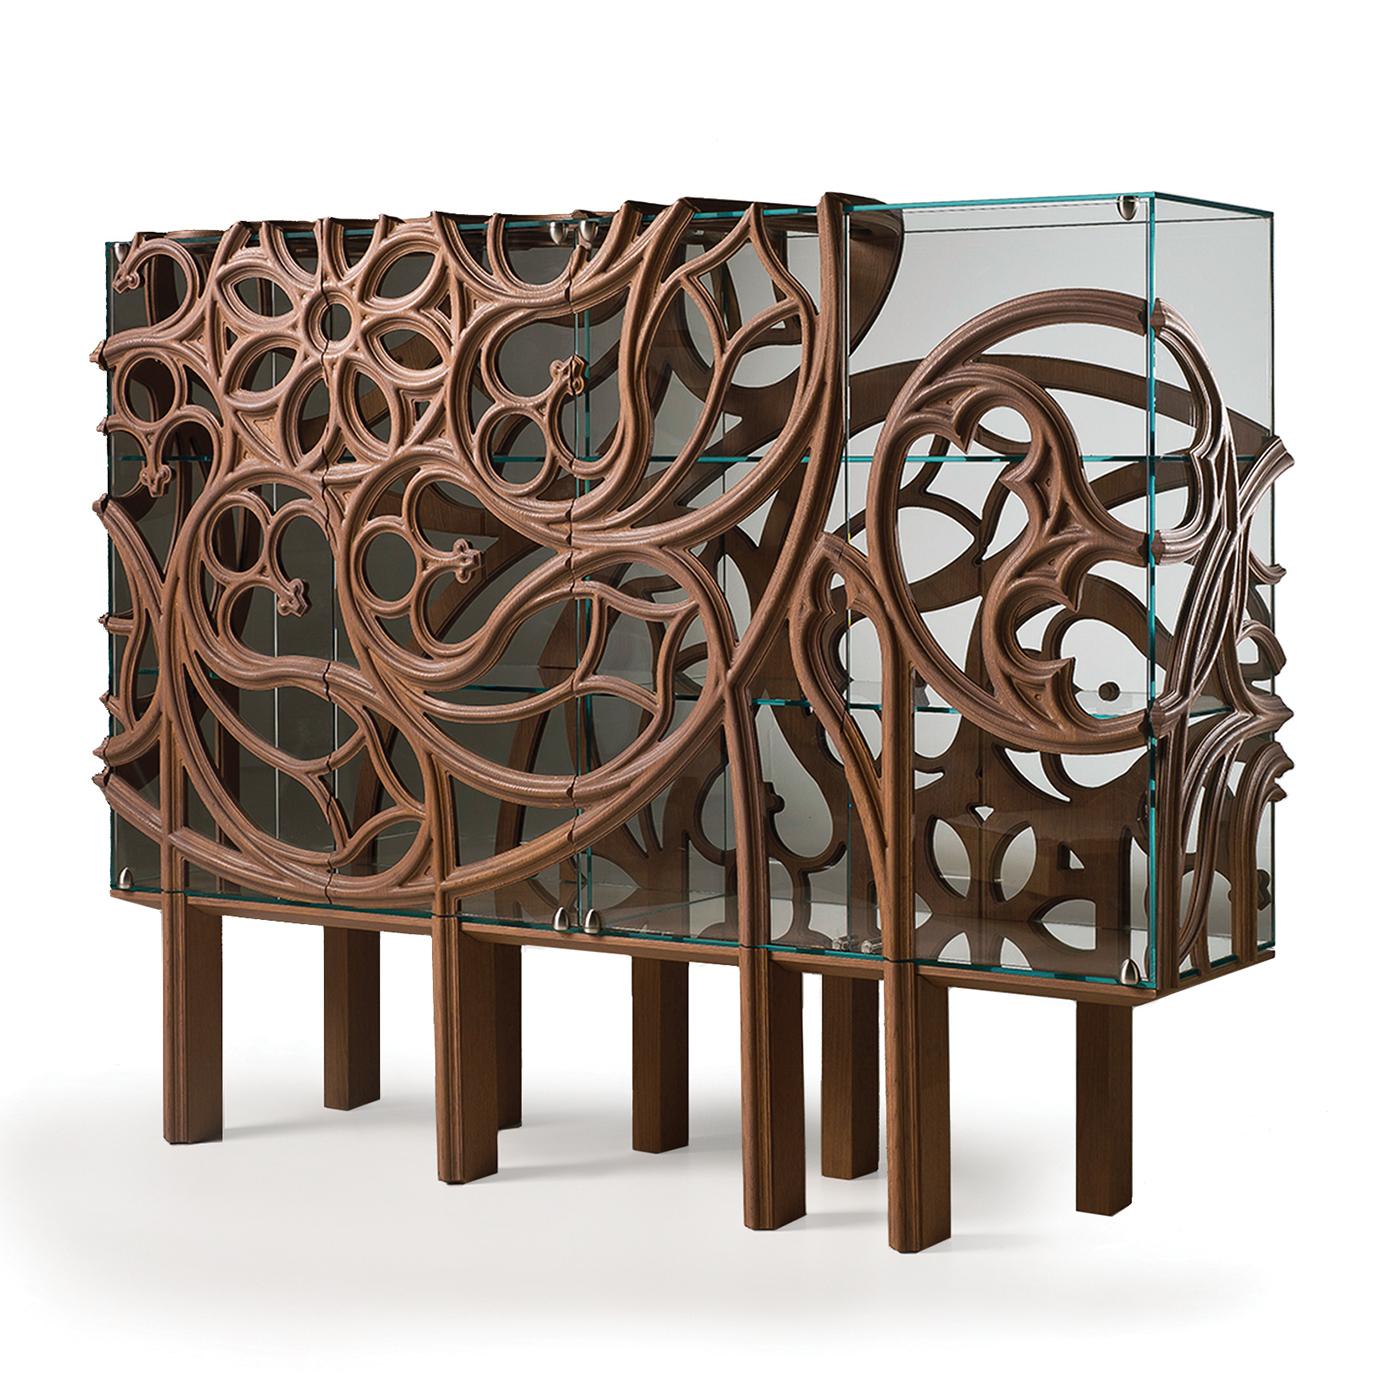 True to its name, this unique cabinet boasts a stunning carved decoration that reinterprets the complex geometric structure of the rose windows in Gothic churches with a contemporary aesthetic. It is part of a limited edition of only ten pieces. Its